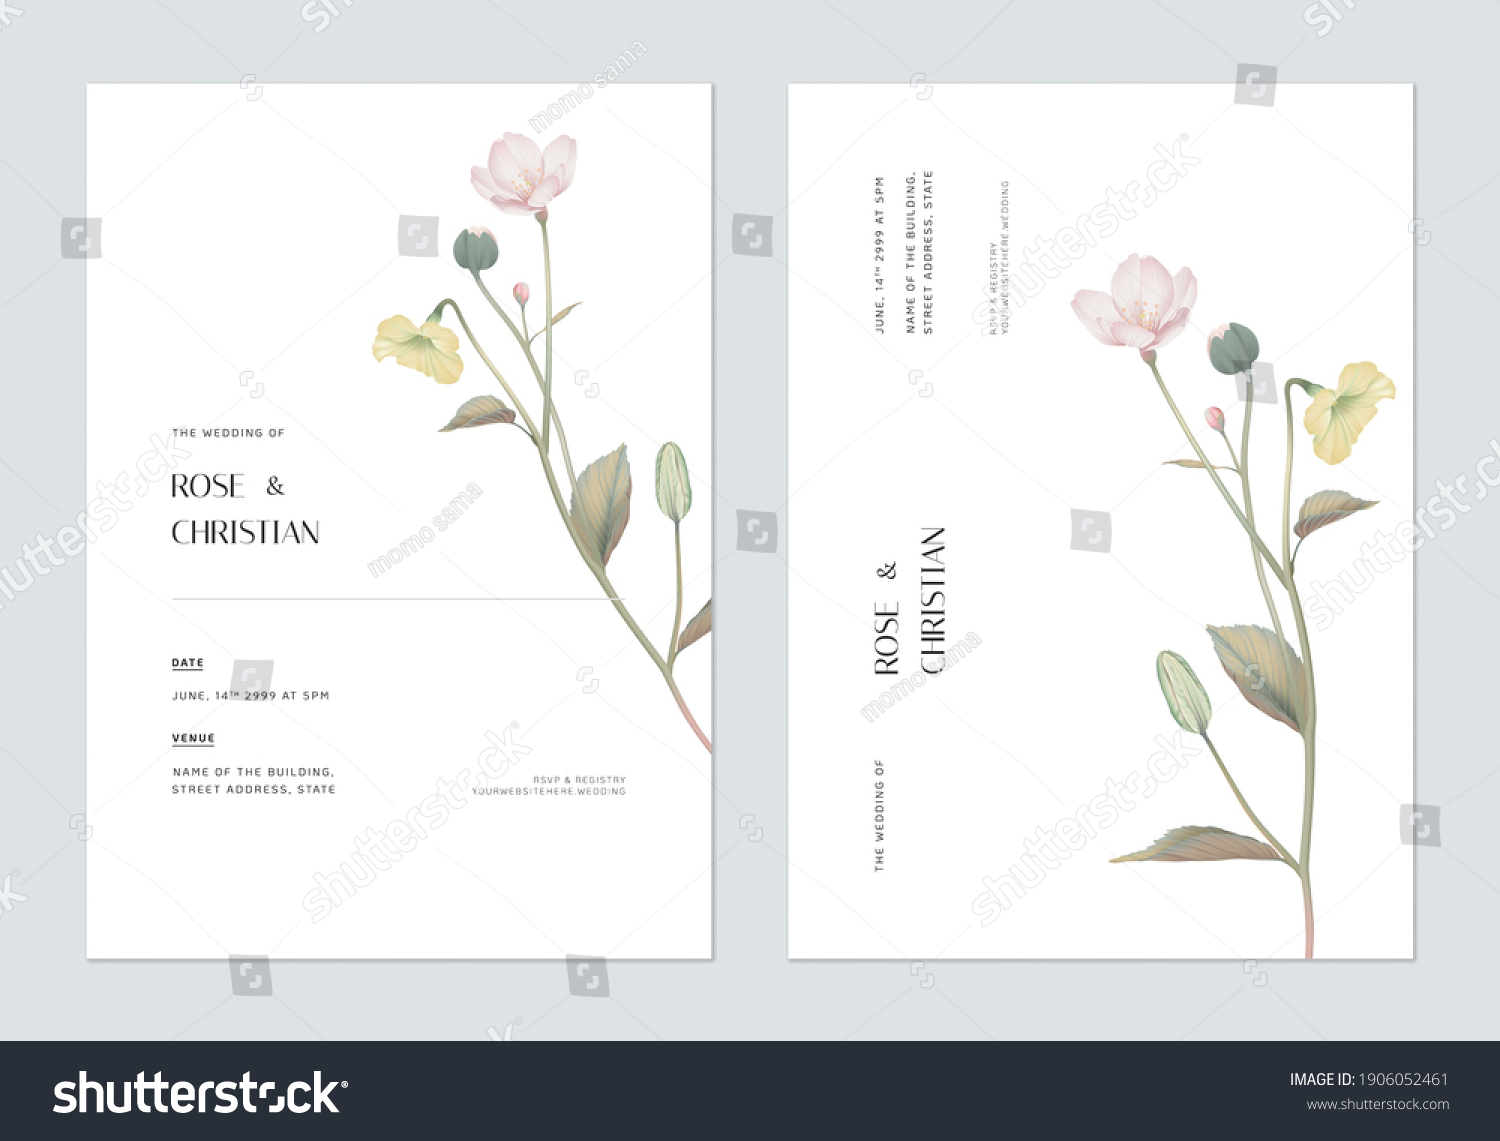 Minimalist floral wedding invitation card template design, various flowers bouquet on white #1906052461